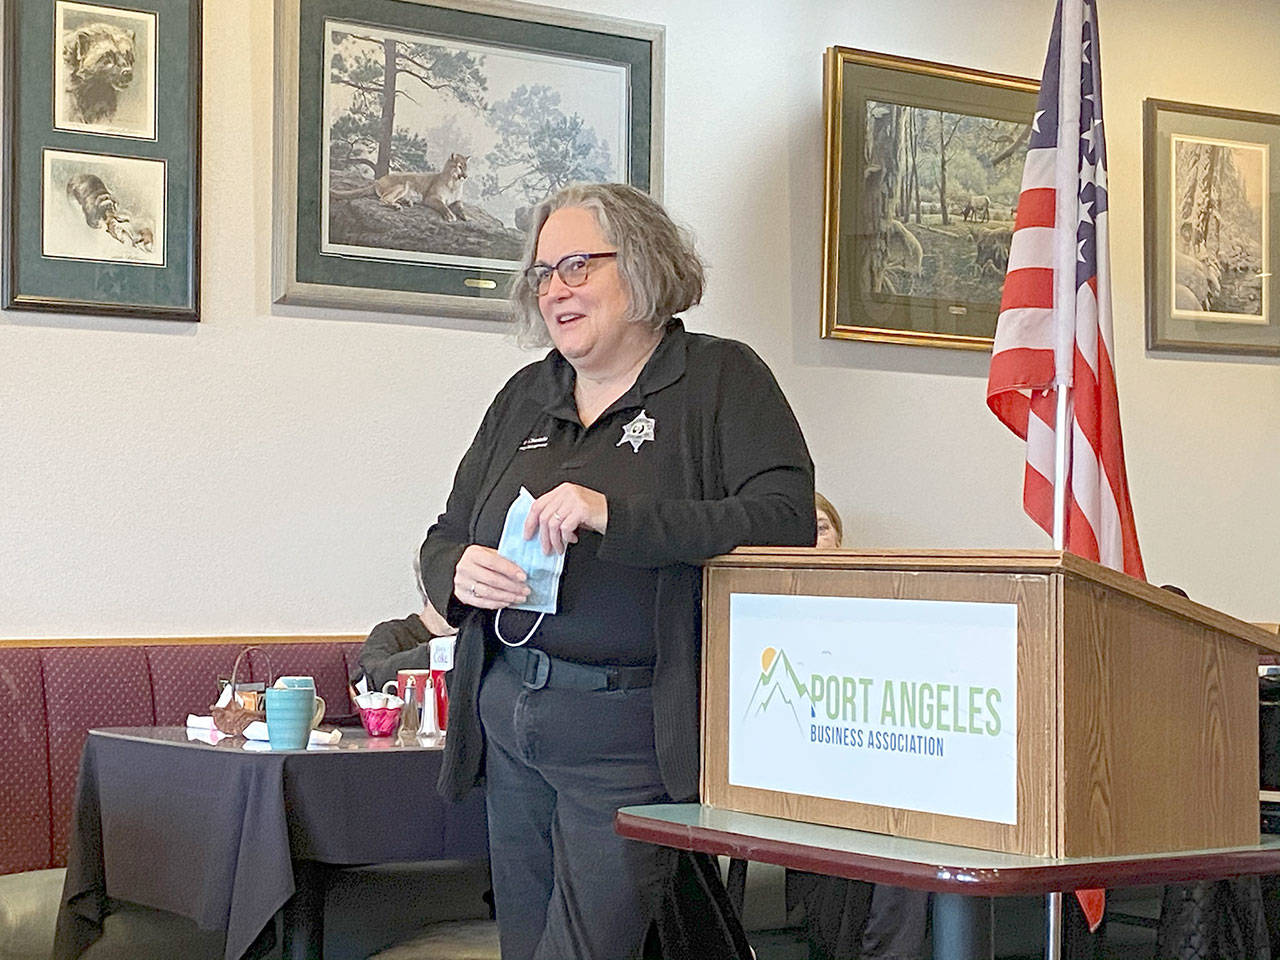 Anne Chastain, Clallam County emergency operations coordinator, discusses the county’s response to COVID-19 at the Port Angeles Business Association’s breakfast meeting. (Rob Ollikainen/Peninsula Daily News)